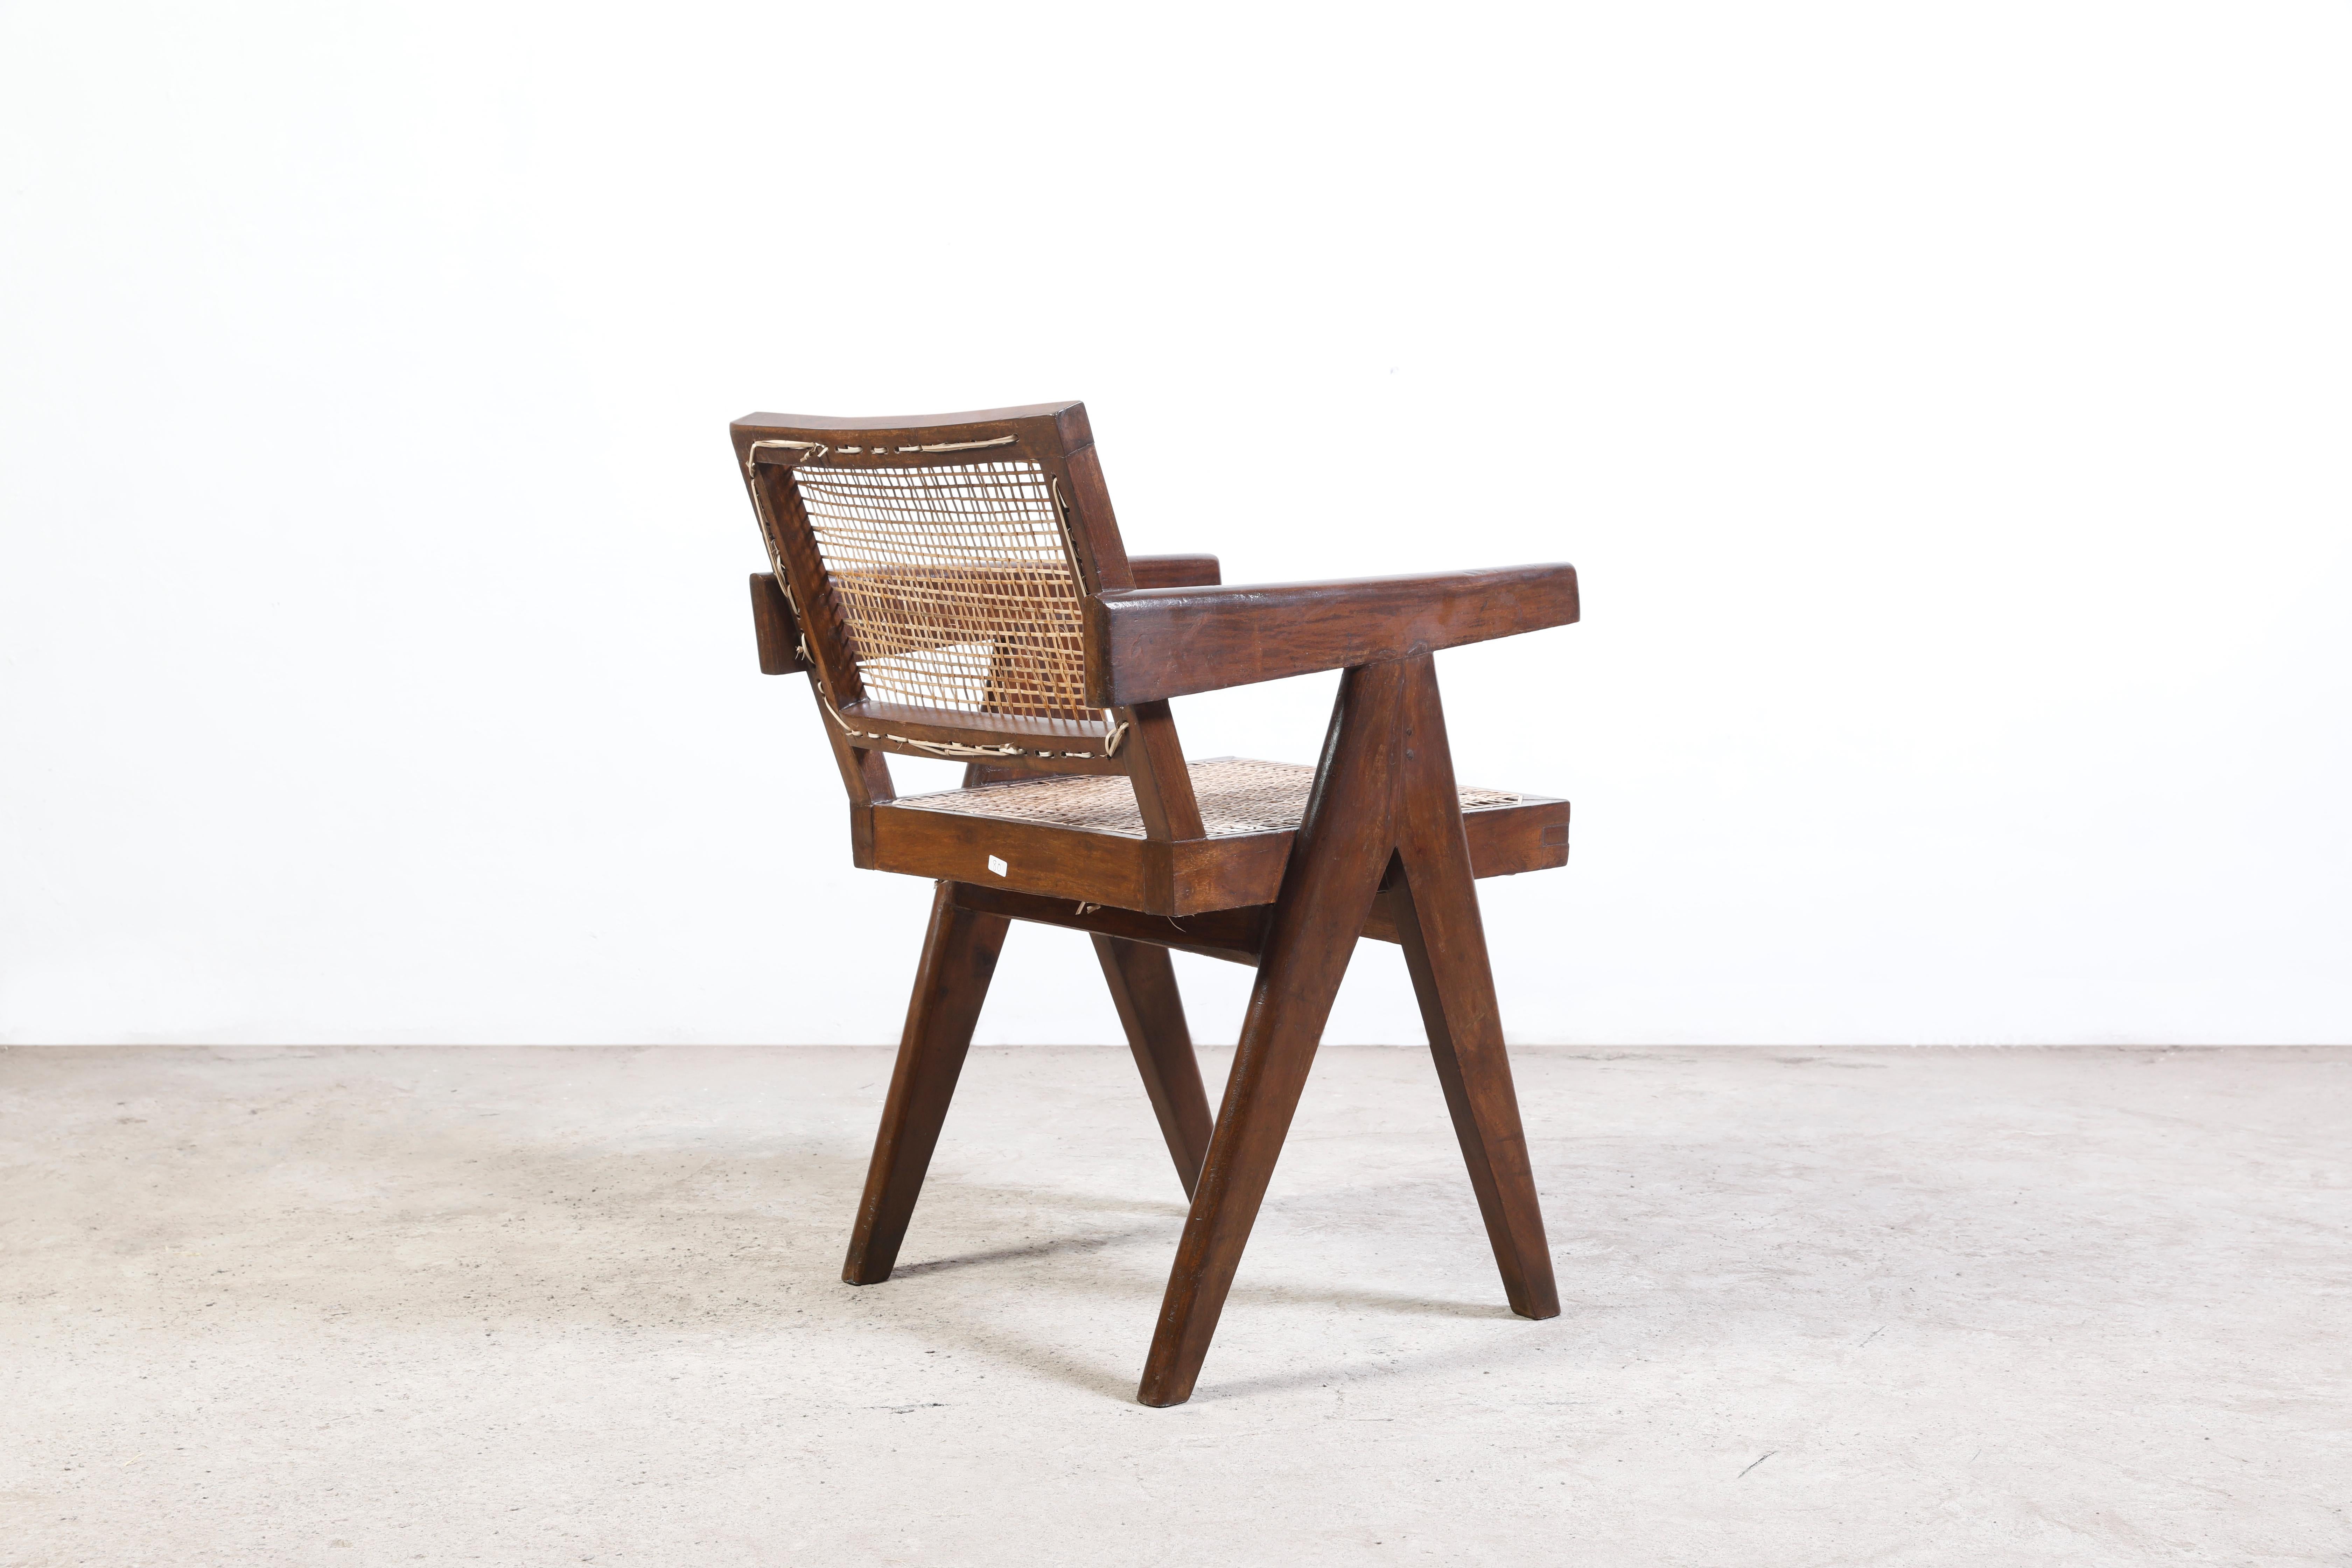 Mid-20th Century Pierre Jeanneret Office Cane Chair Authentic Mid-Century Modern PJ-SI-28-B